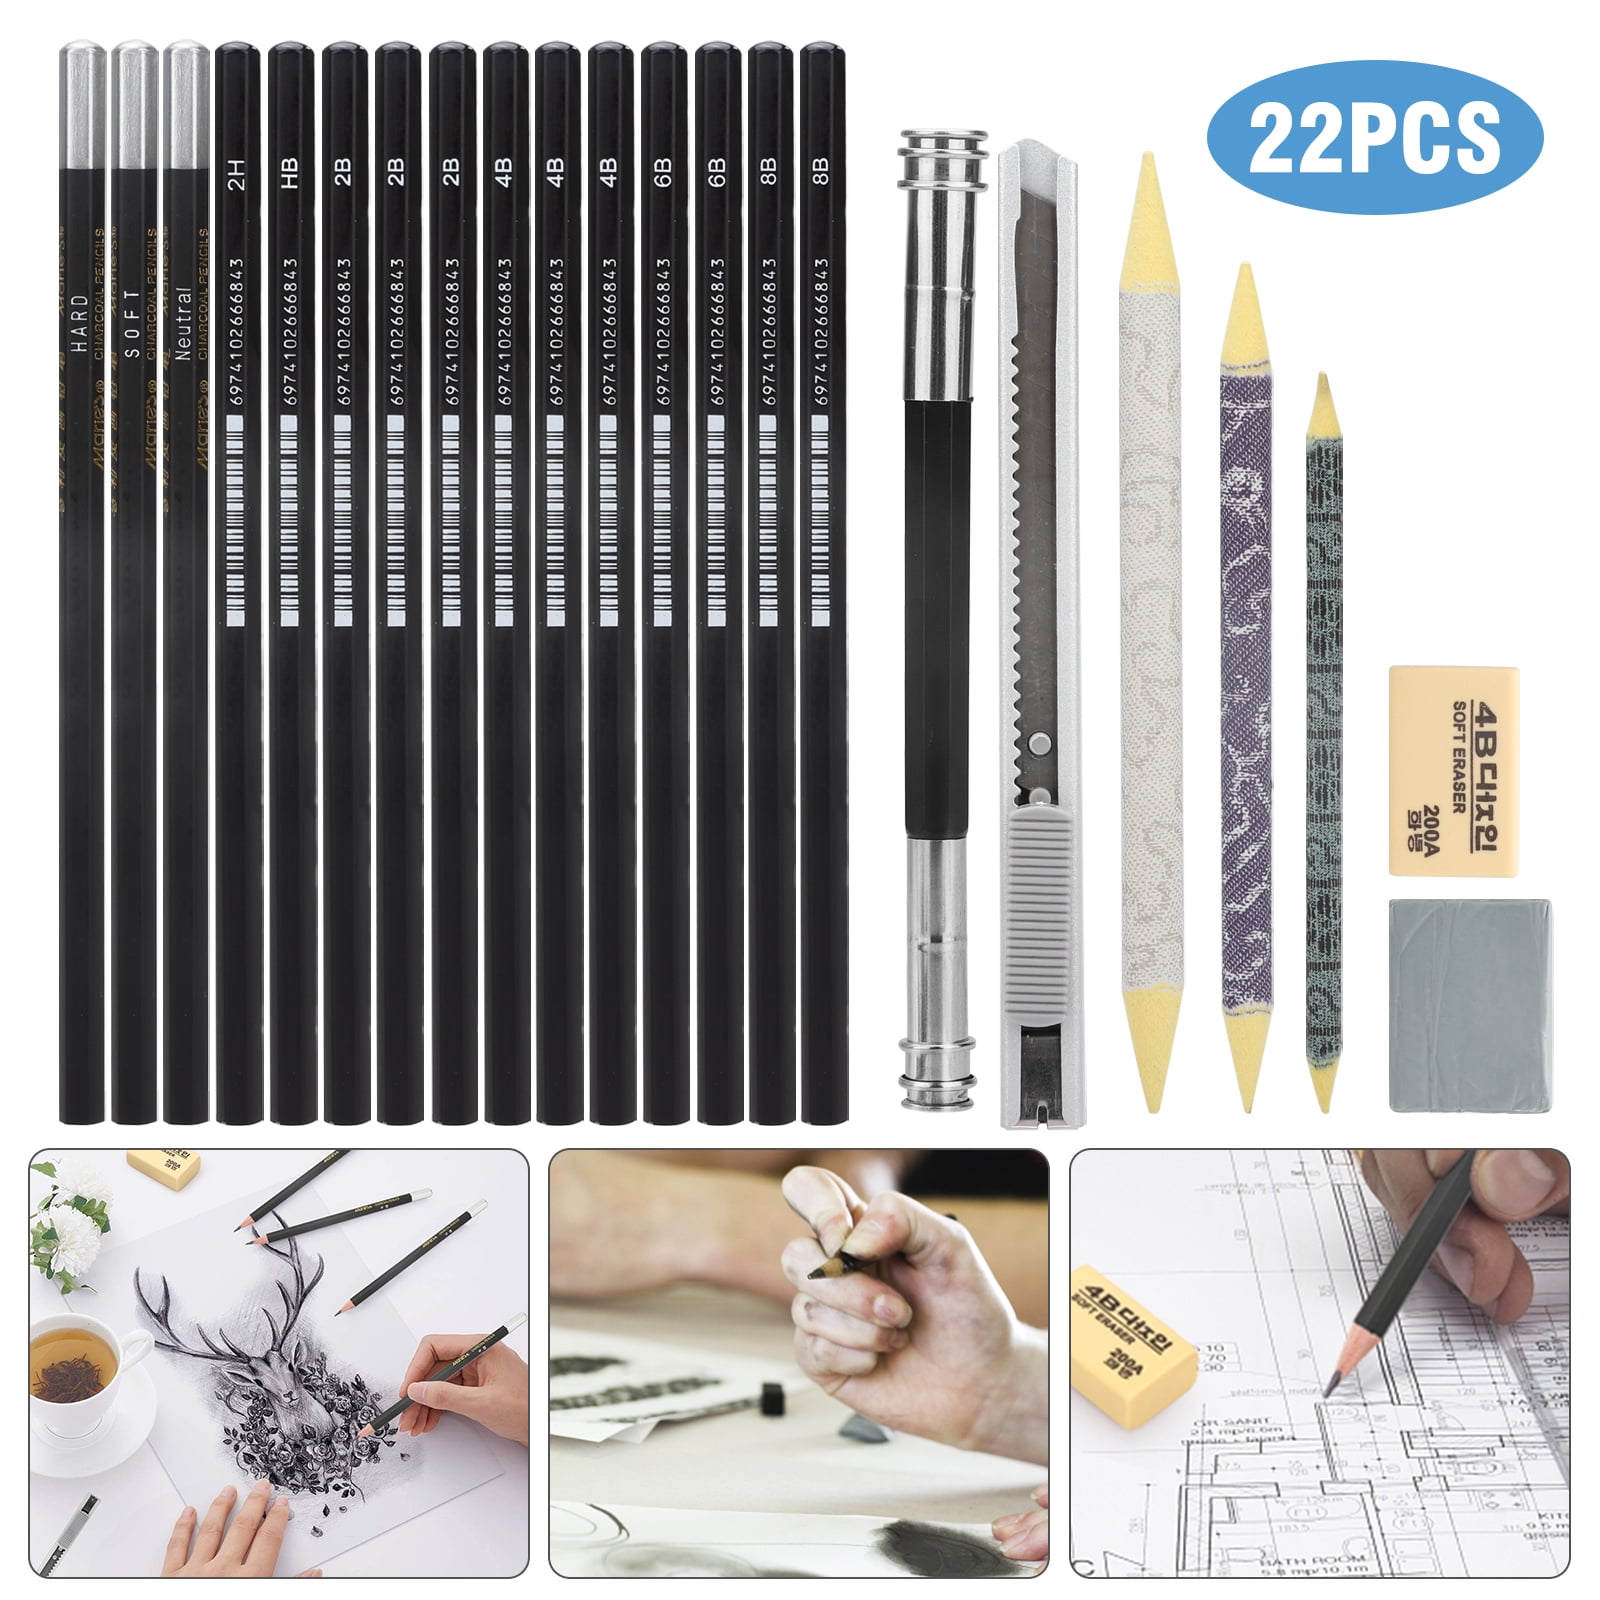 20 Pcs Professional Drawing Pencil Kit Marie's Sketch Pencil Set Charcoal  Crayon Drawing Artist Toolspencil Artist Tools Free Shipping 